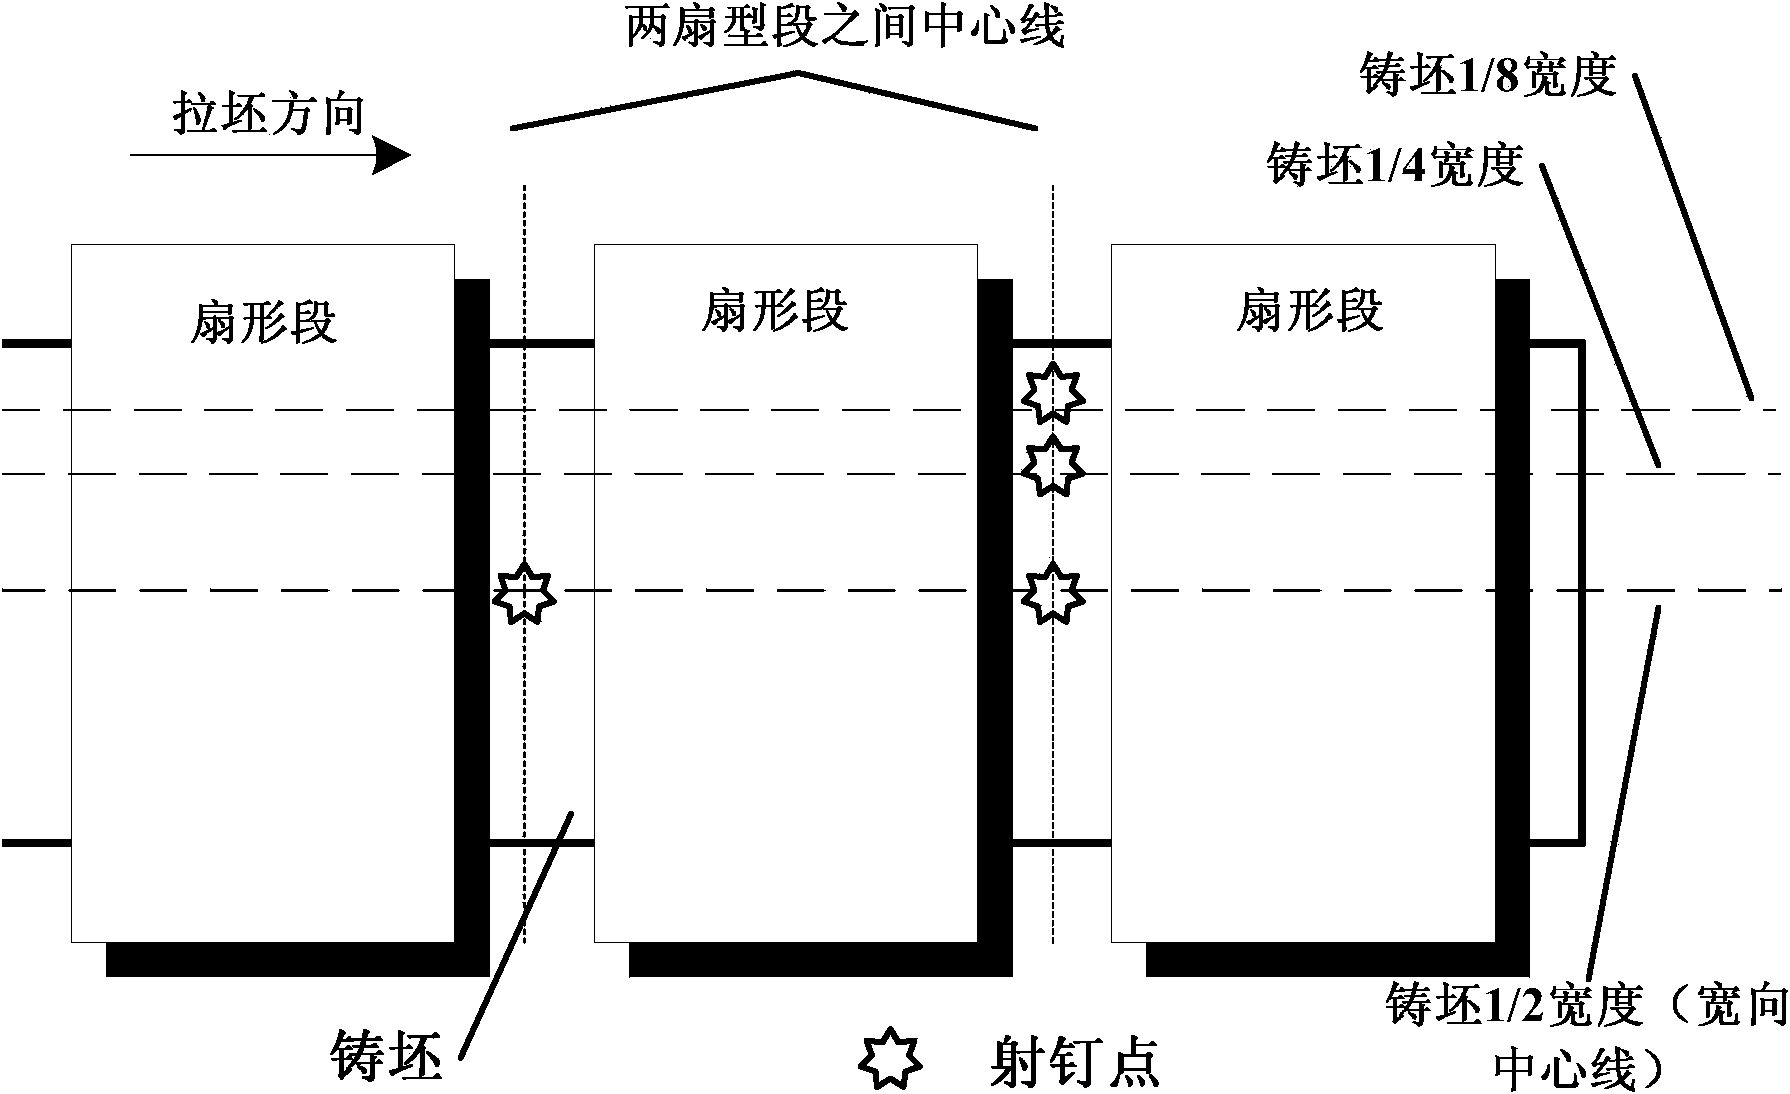 Control method of soft-reduction depressed region of wide and thick plate continuous casting blank